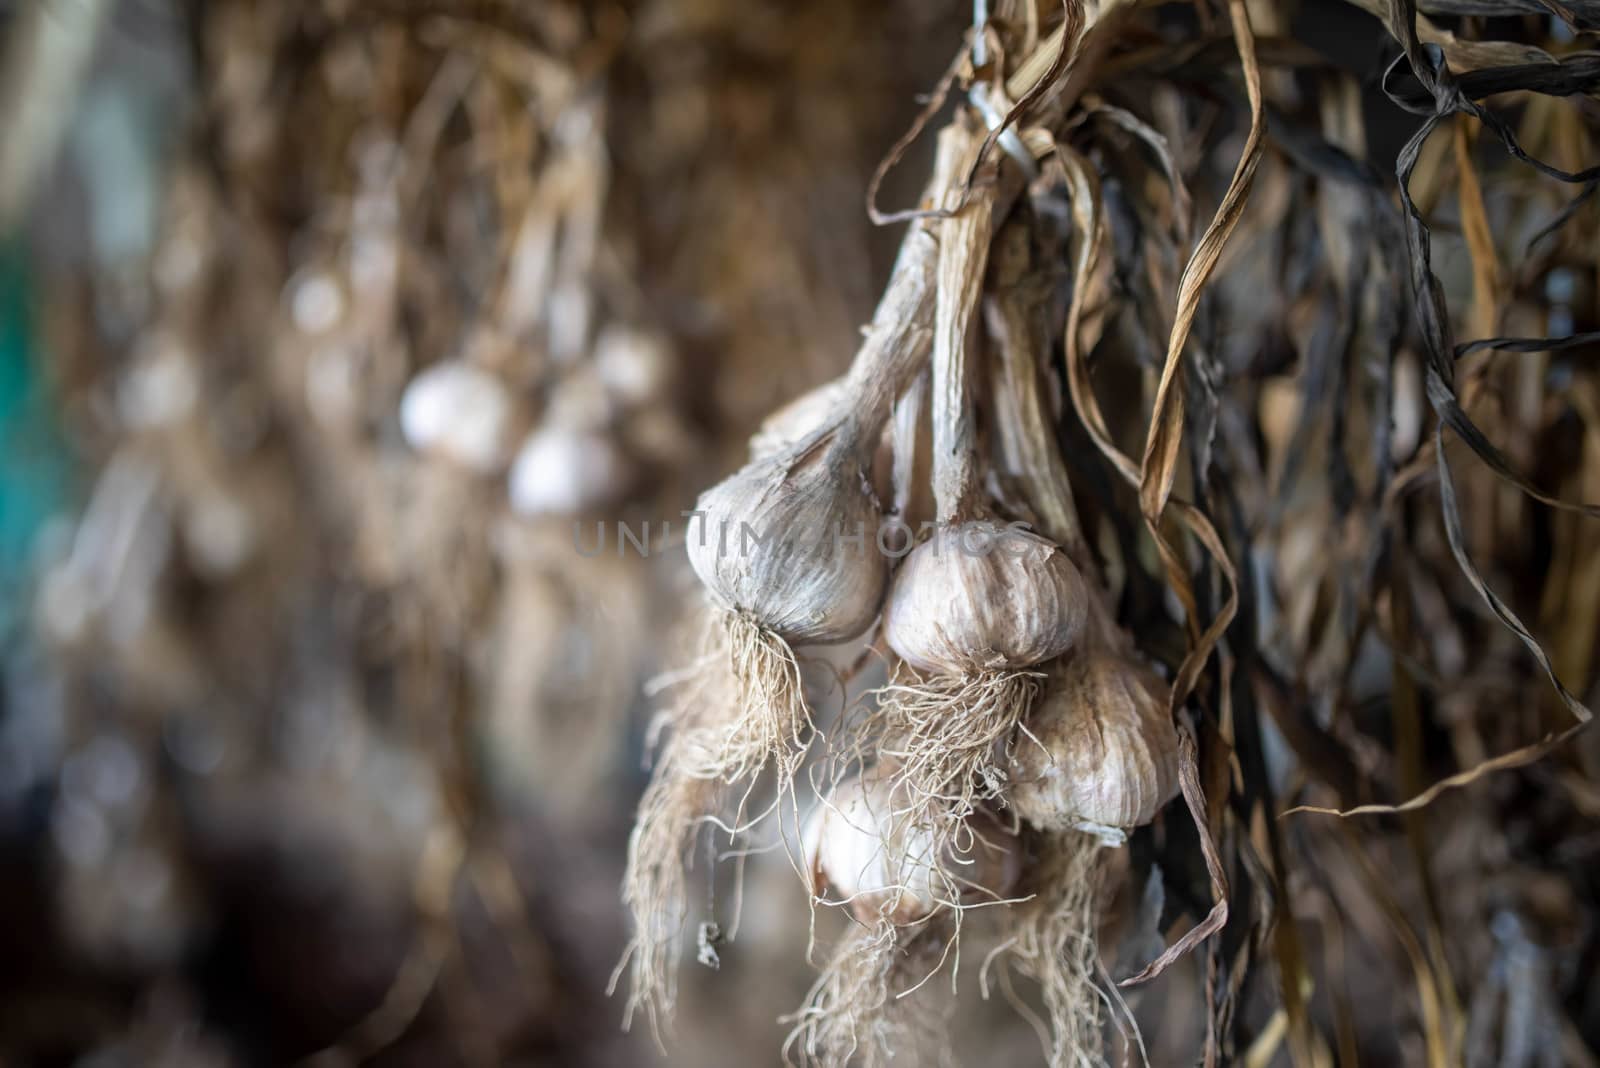 Bunches of garlic hangoing in a barn to dry by marysalen